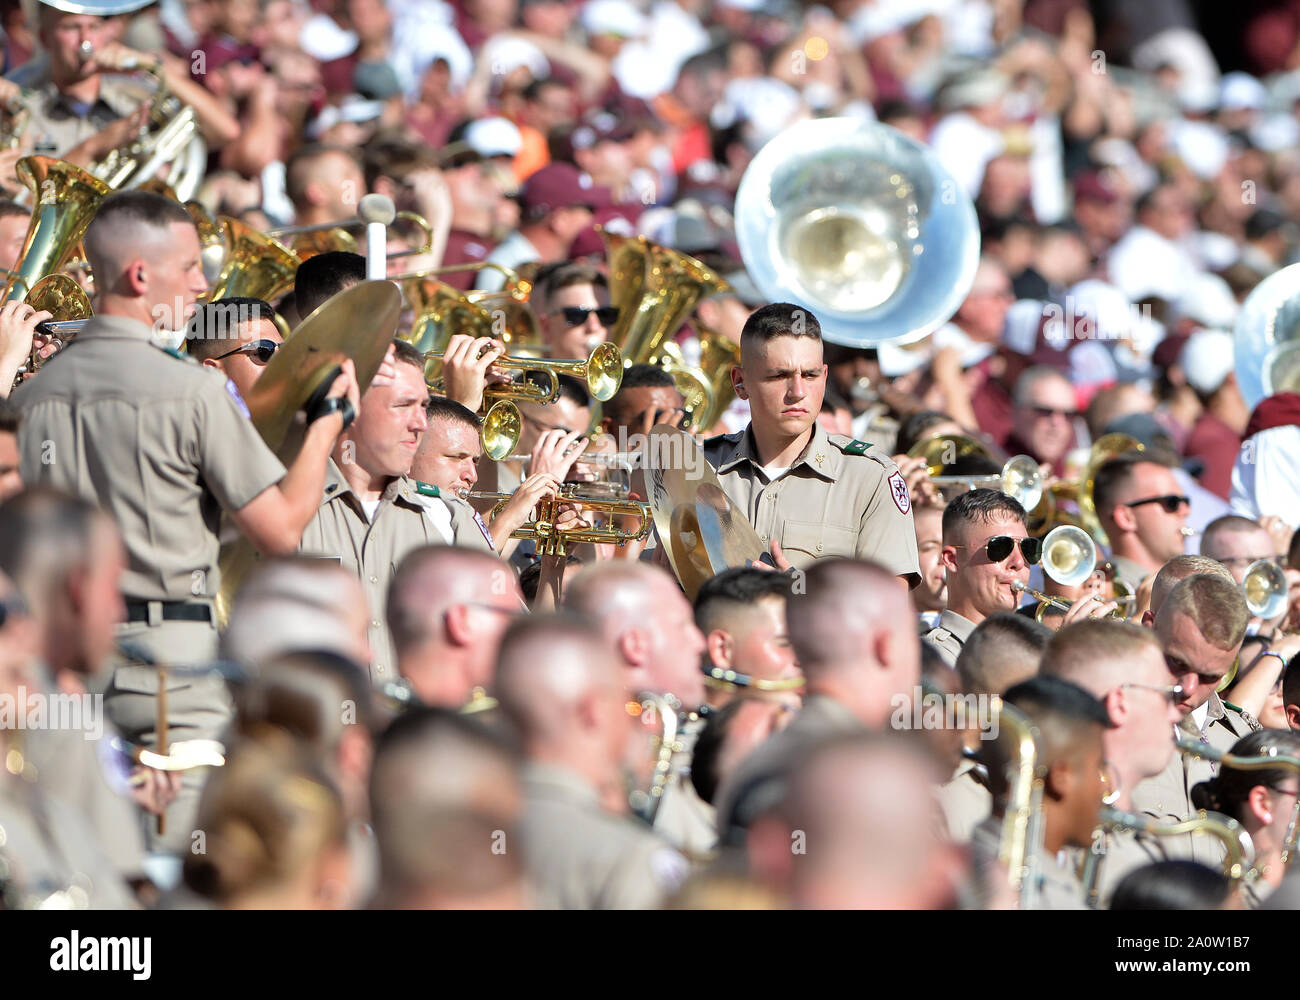 College Station, TX, USA. 21st Sep, 2019. Texas A&M Aggies Marching band performing during the game between the Auburn University Tigers and the Texas A&M University Aggies at Kyle Field Stadium in College Station, TX. Auburn Tigers wins against Texas A&M Aggies, 28-20. Patrick Green/CSM/Alamy Live News Stock Photo